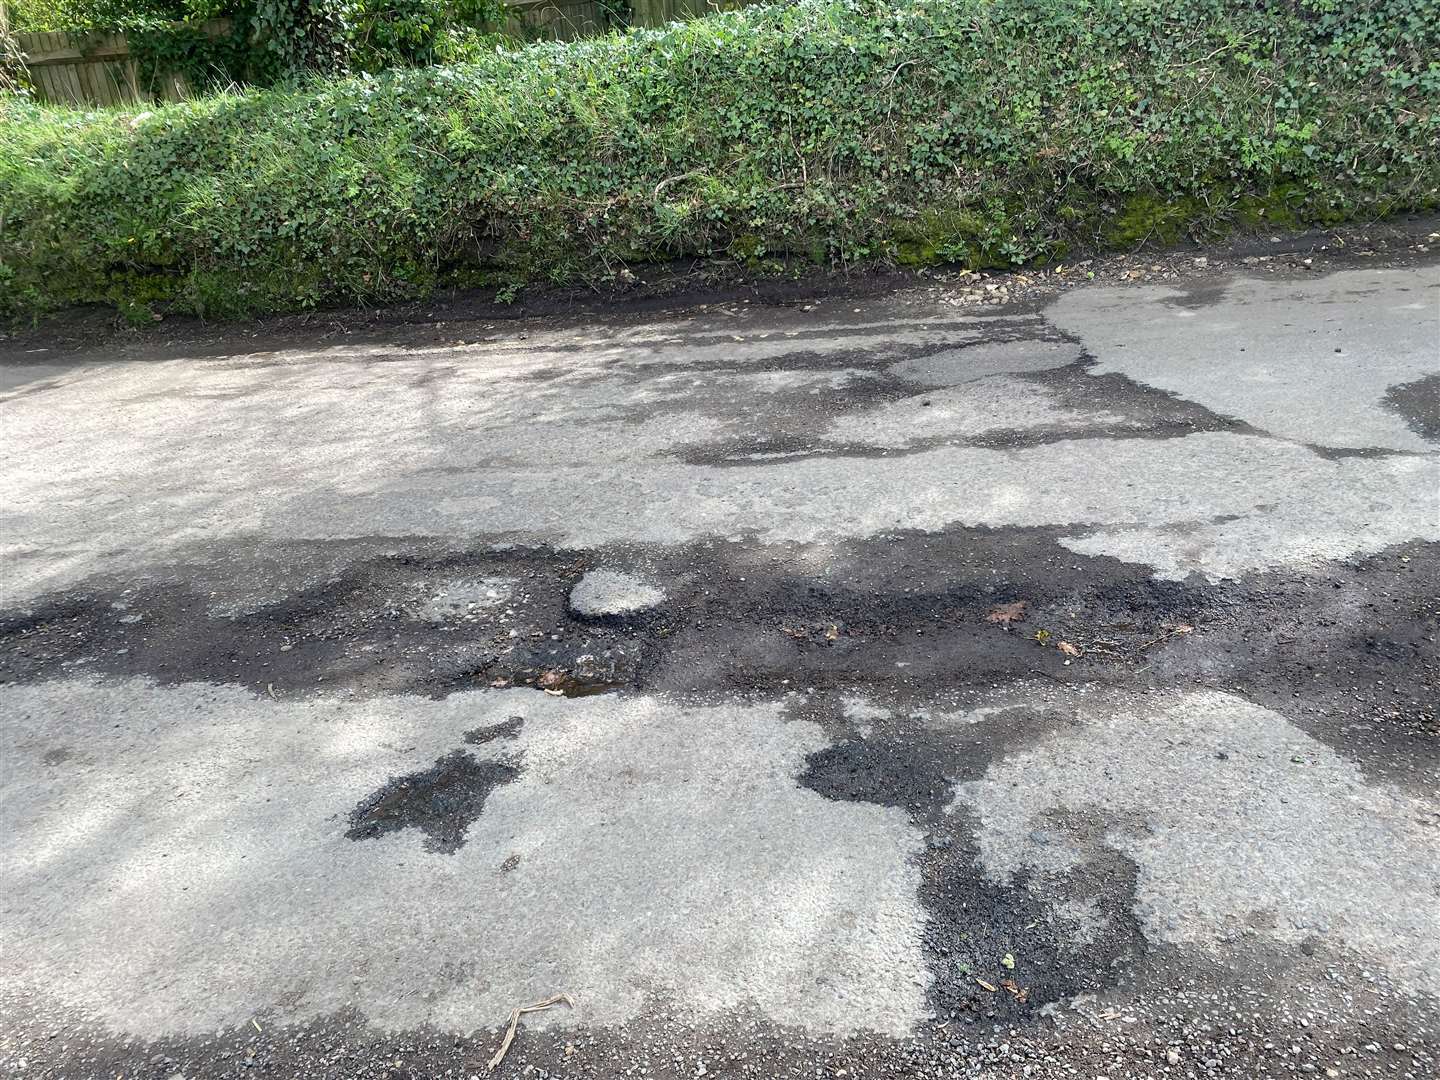 Residents claim the road has been left neglected for years